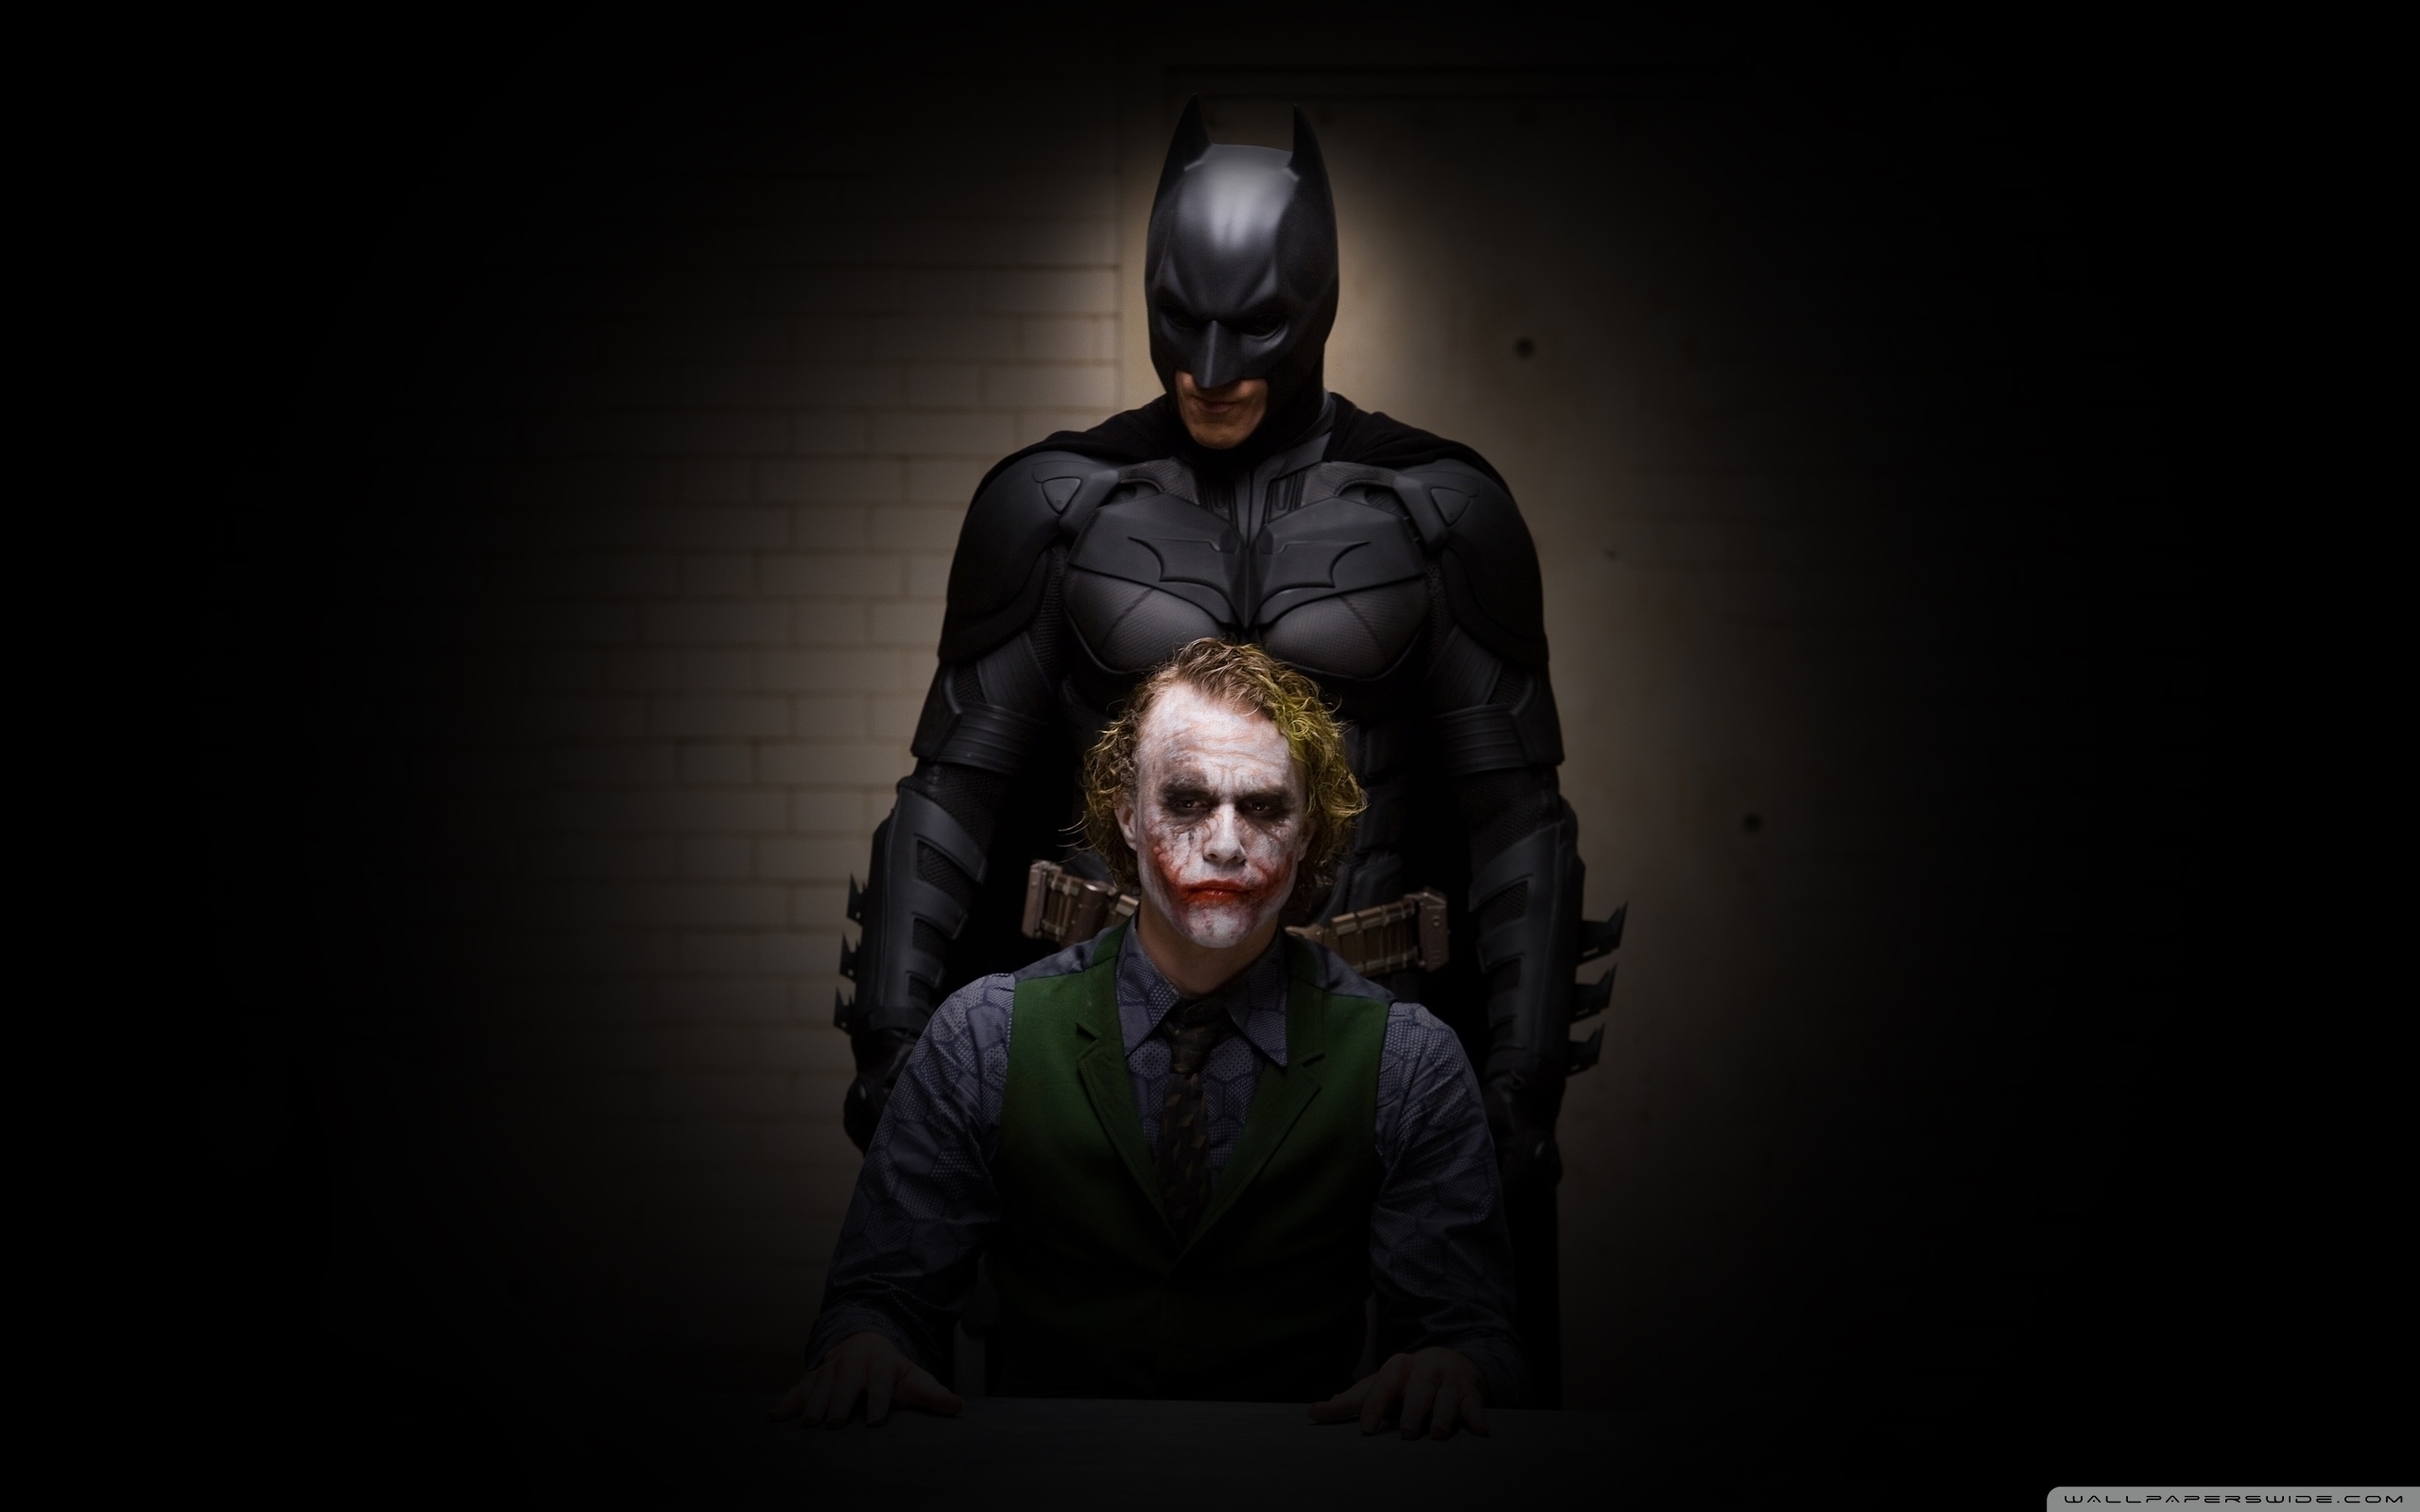 10 Latest Batman And Joker Images FULL HD 1920×1080 For PC Background